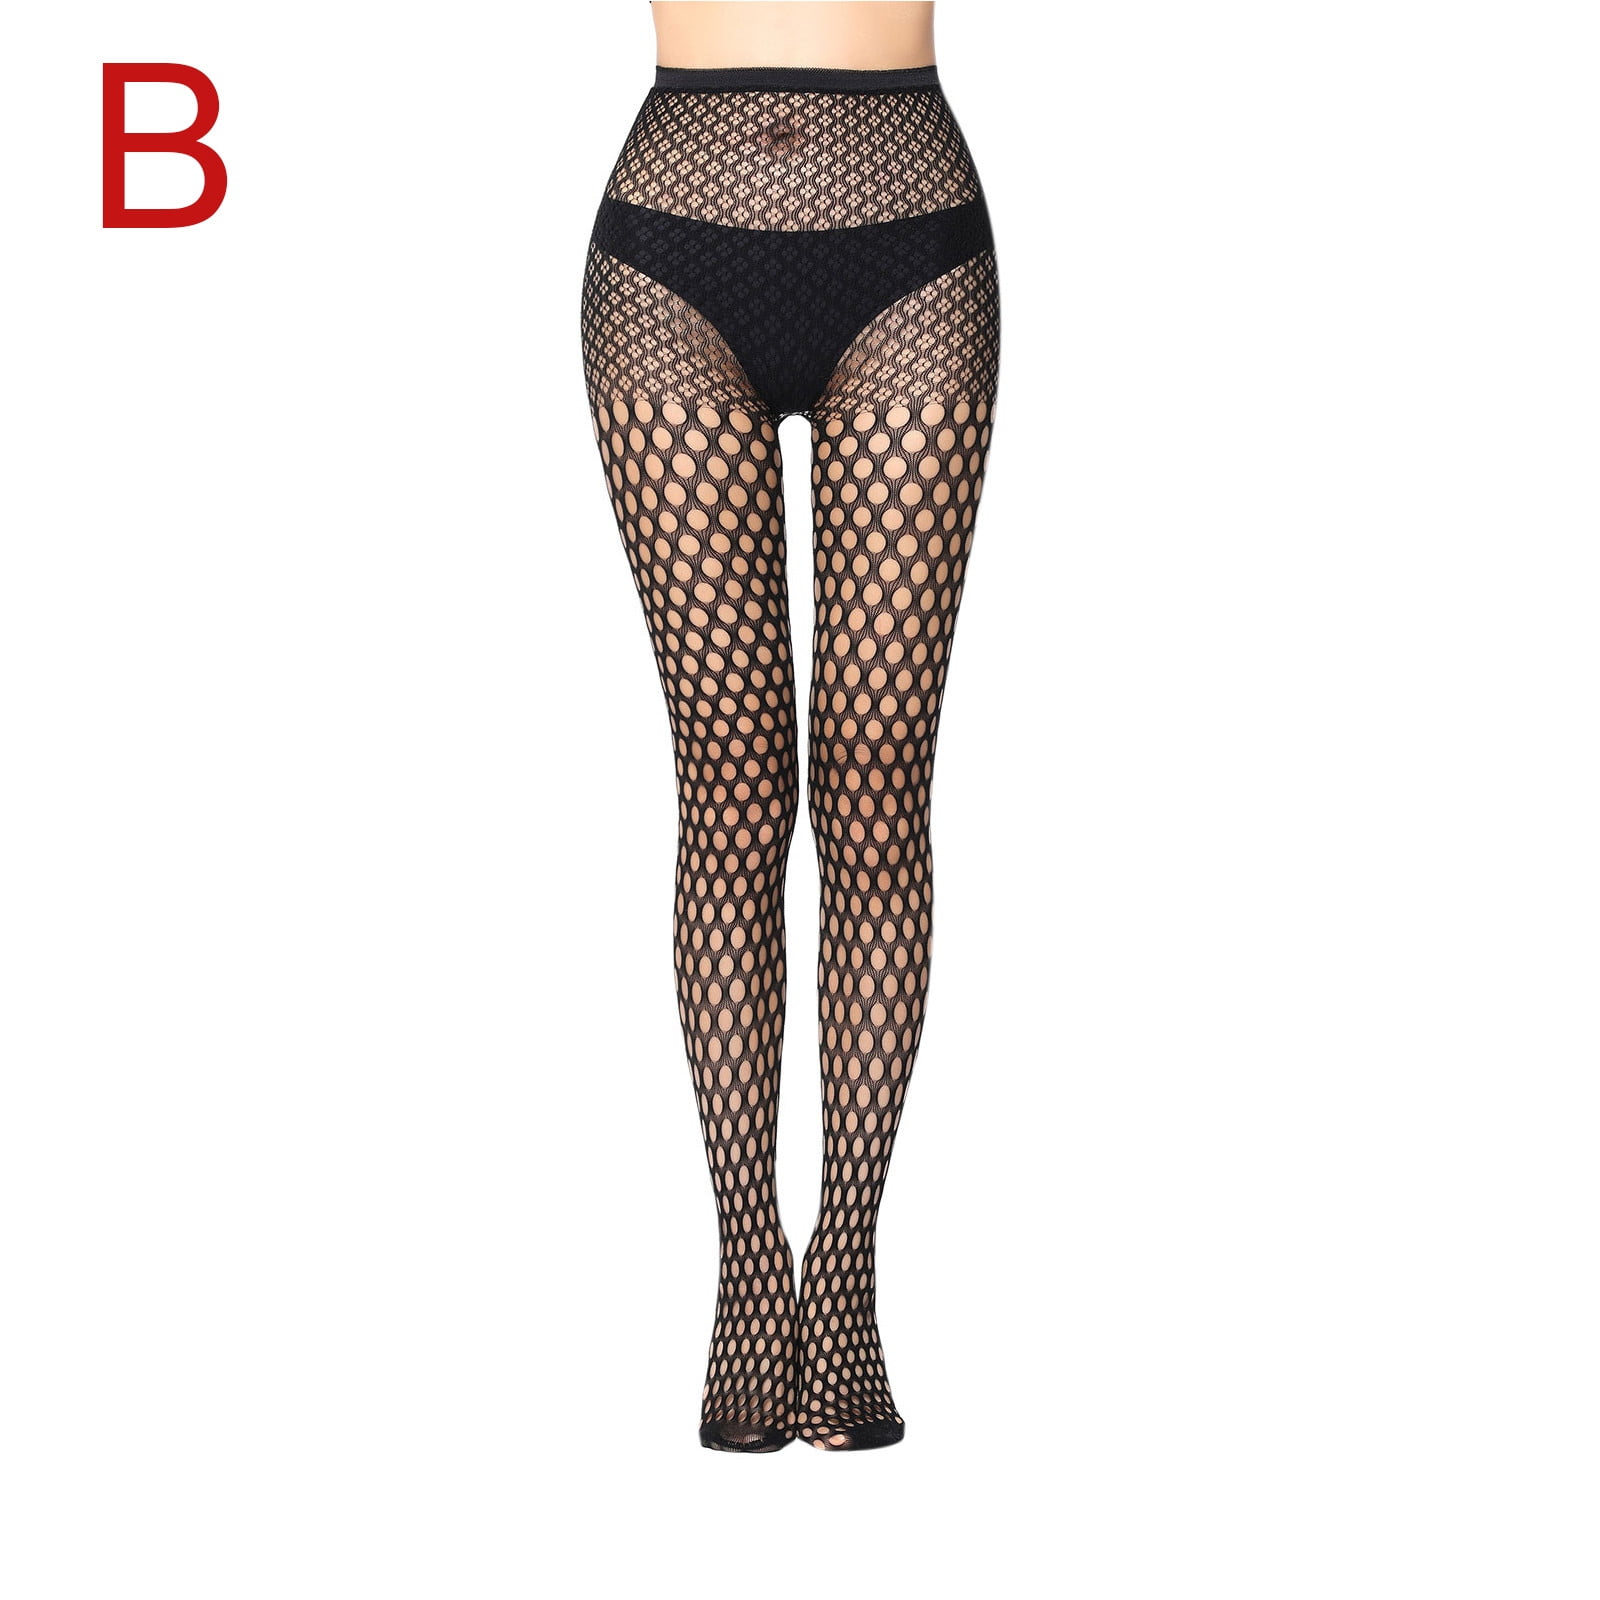 Chiccall Sexy Black Fishnet Tights,Sheer Patterned Tights Thigh-High  Stockings Lace Leggings Mesh Pantyhose Gifts for Women Her,on Clearance 